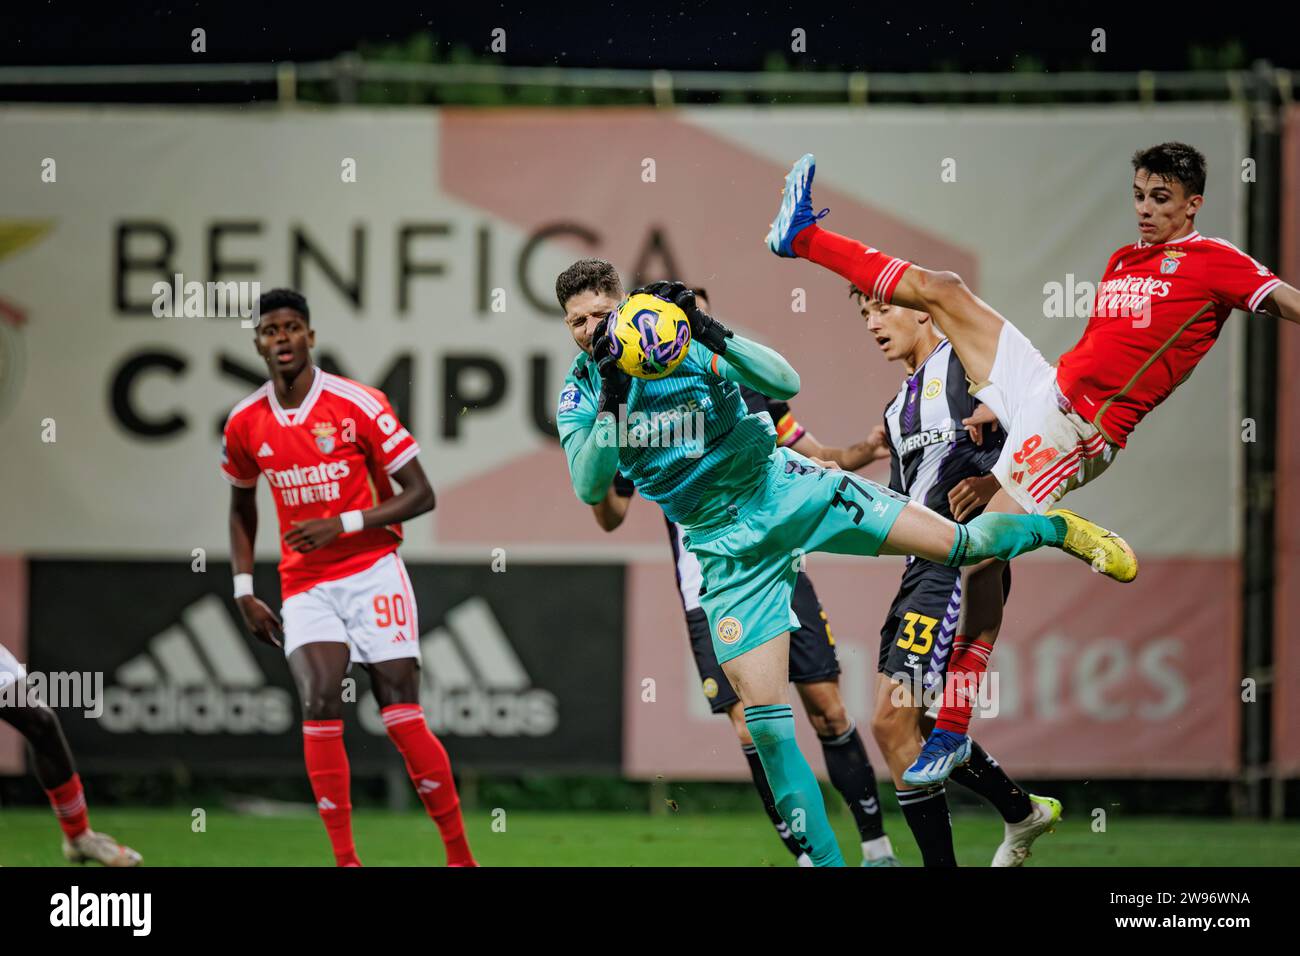 Lucas Oliveira (goalkeeper) catches the ball between Benfica defenders during Liga Portugal 2 Sabseg 23/24 game between SL Benfica B and CD Nacional a Stock Photo